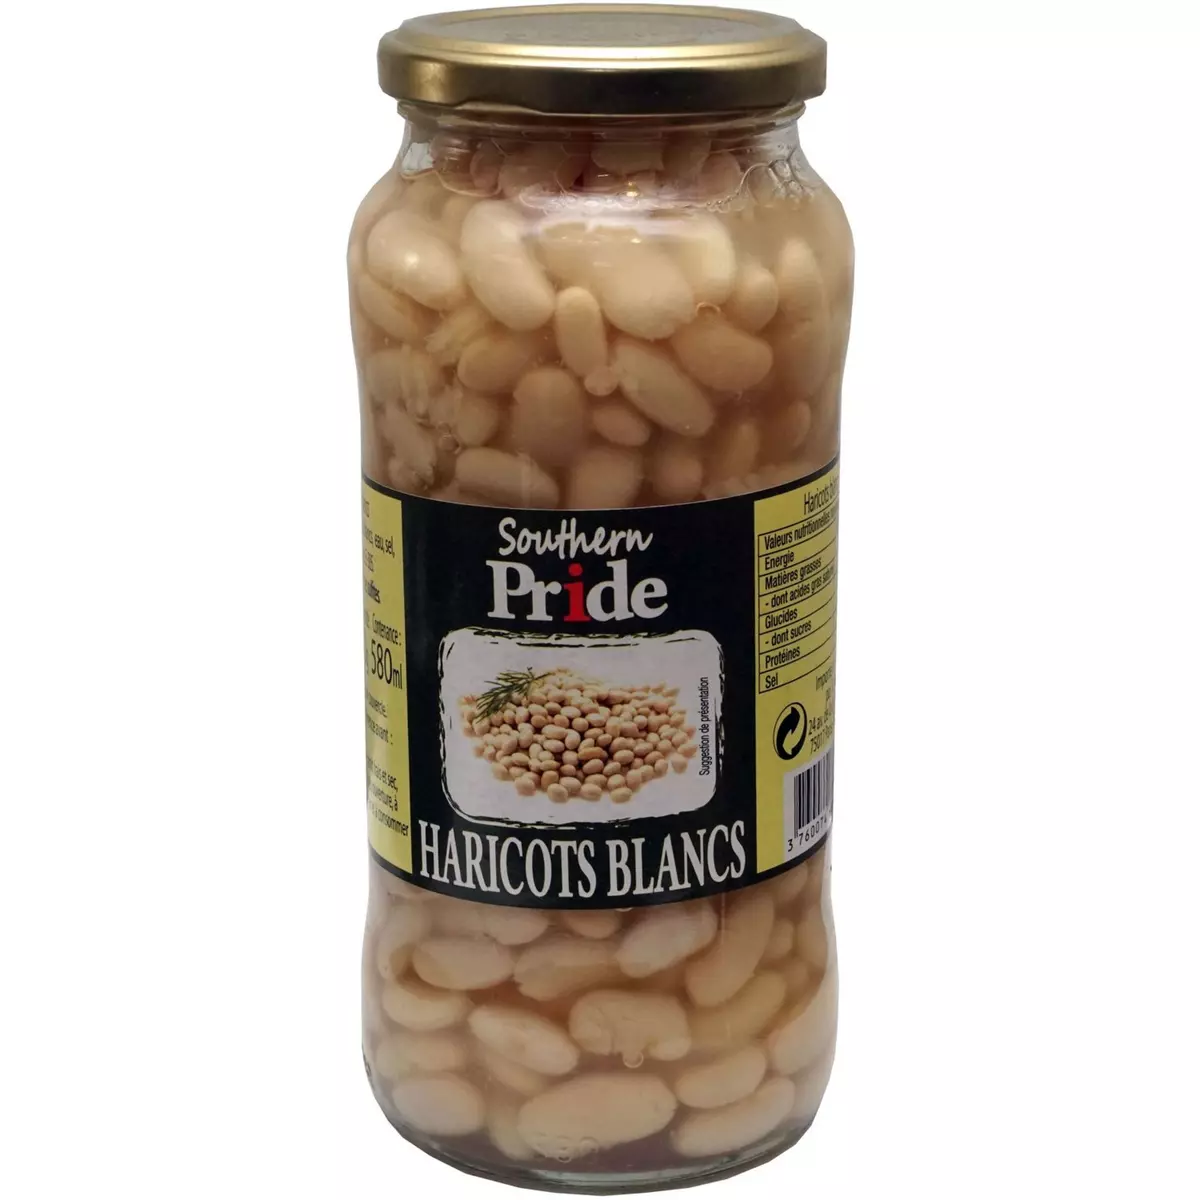 SOUTHERN PRIDE Haricots blancs 400g